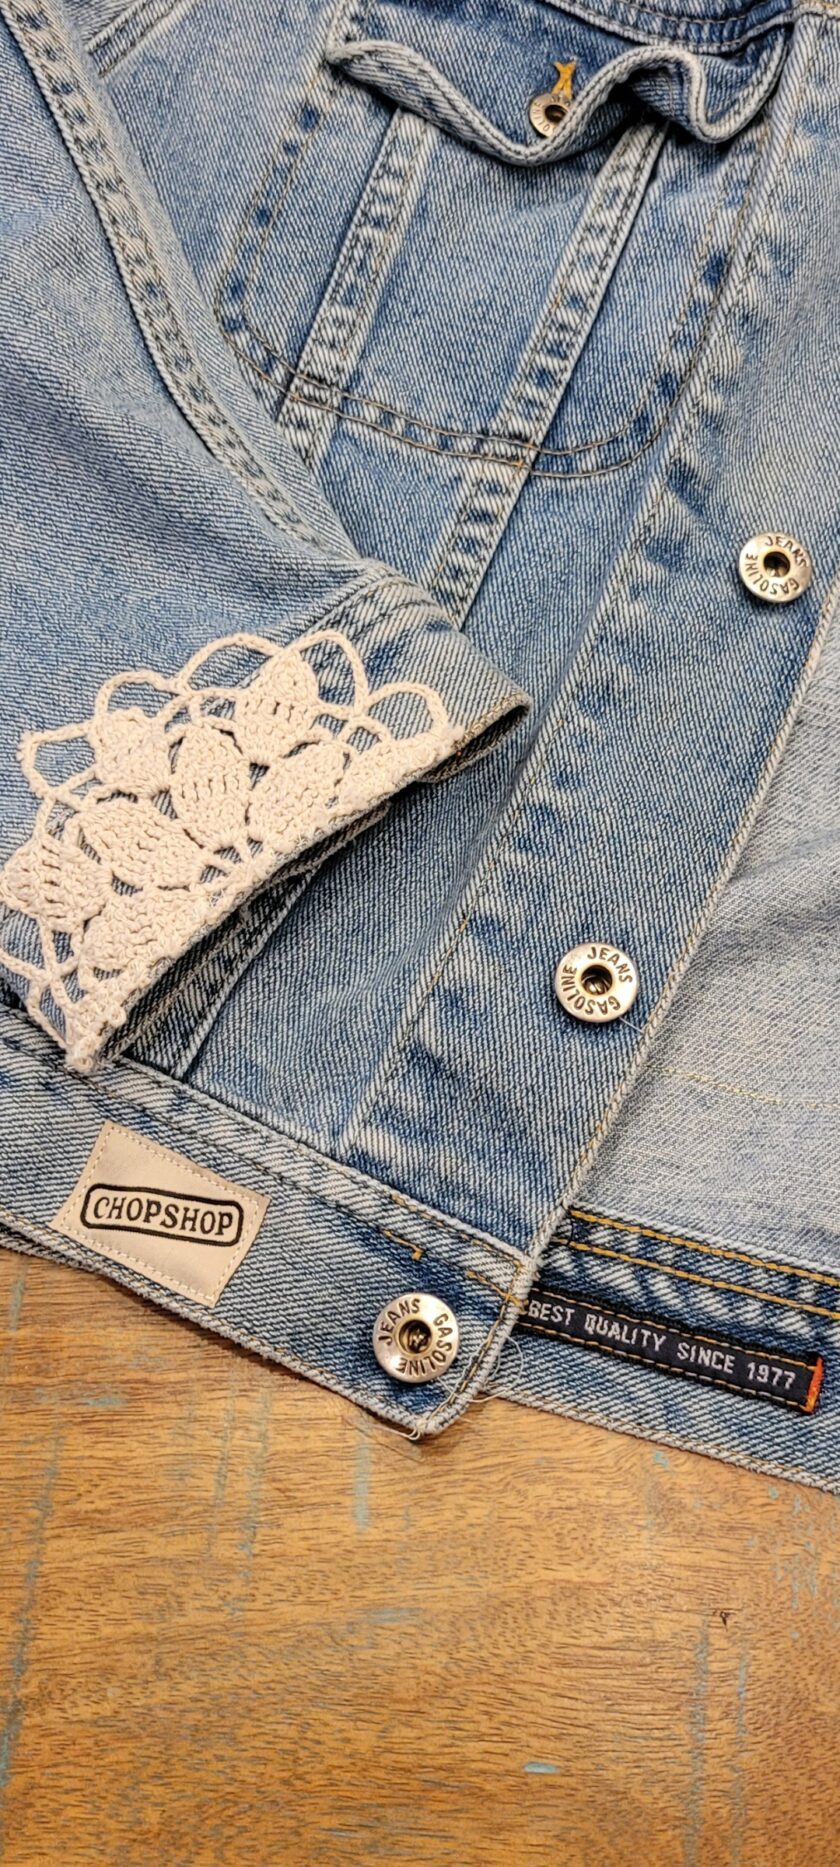 A close up of a denim jacket with lace on it.